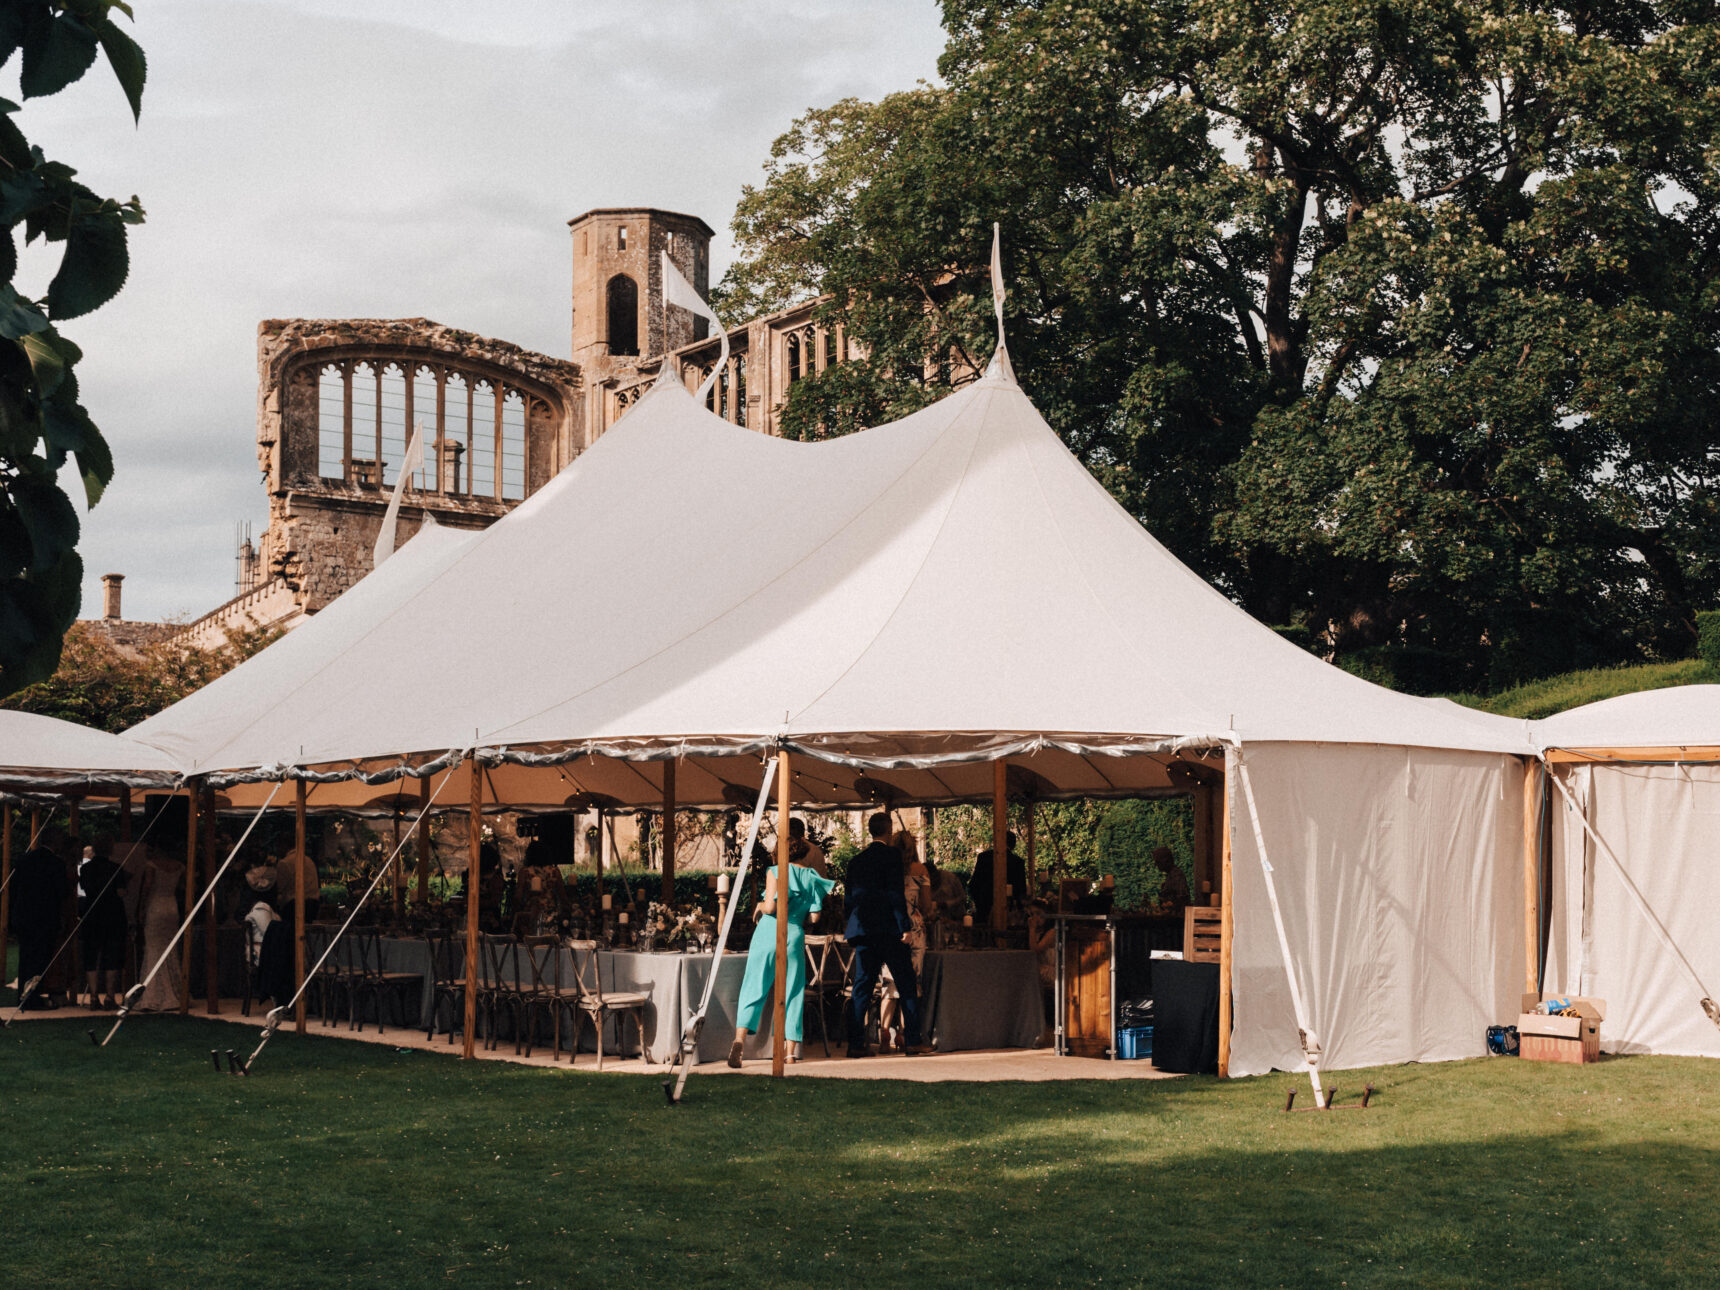 Sudeley's Mulberry Lawn can host al fresco or marquee wedding celebrations, with spectacular views to the romantic, Royal apartment ruins